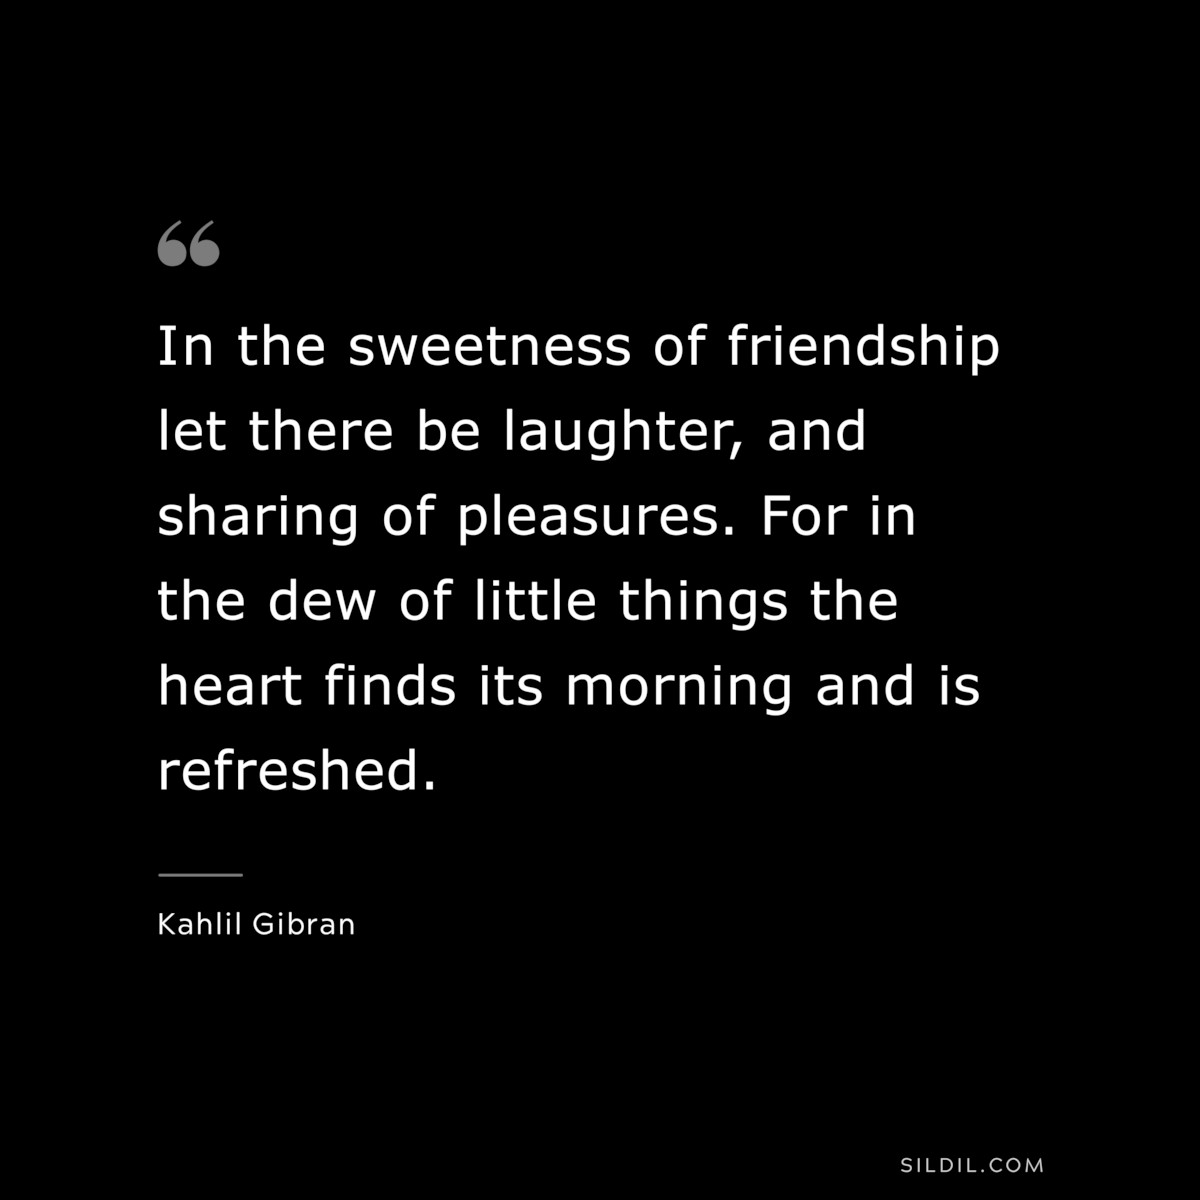 In the sweetness of friendship let there be laughter, and sharing of pleasures. For in the dew of little things the heart finds its morning and is refreshed. ― Kahlil Gibran